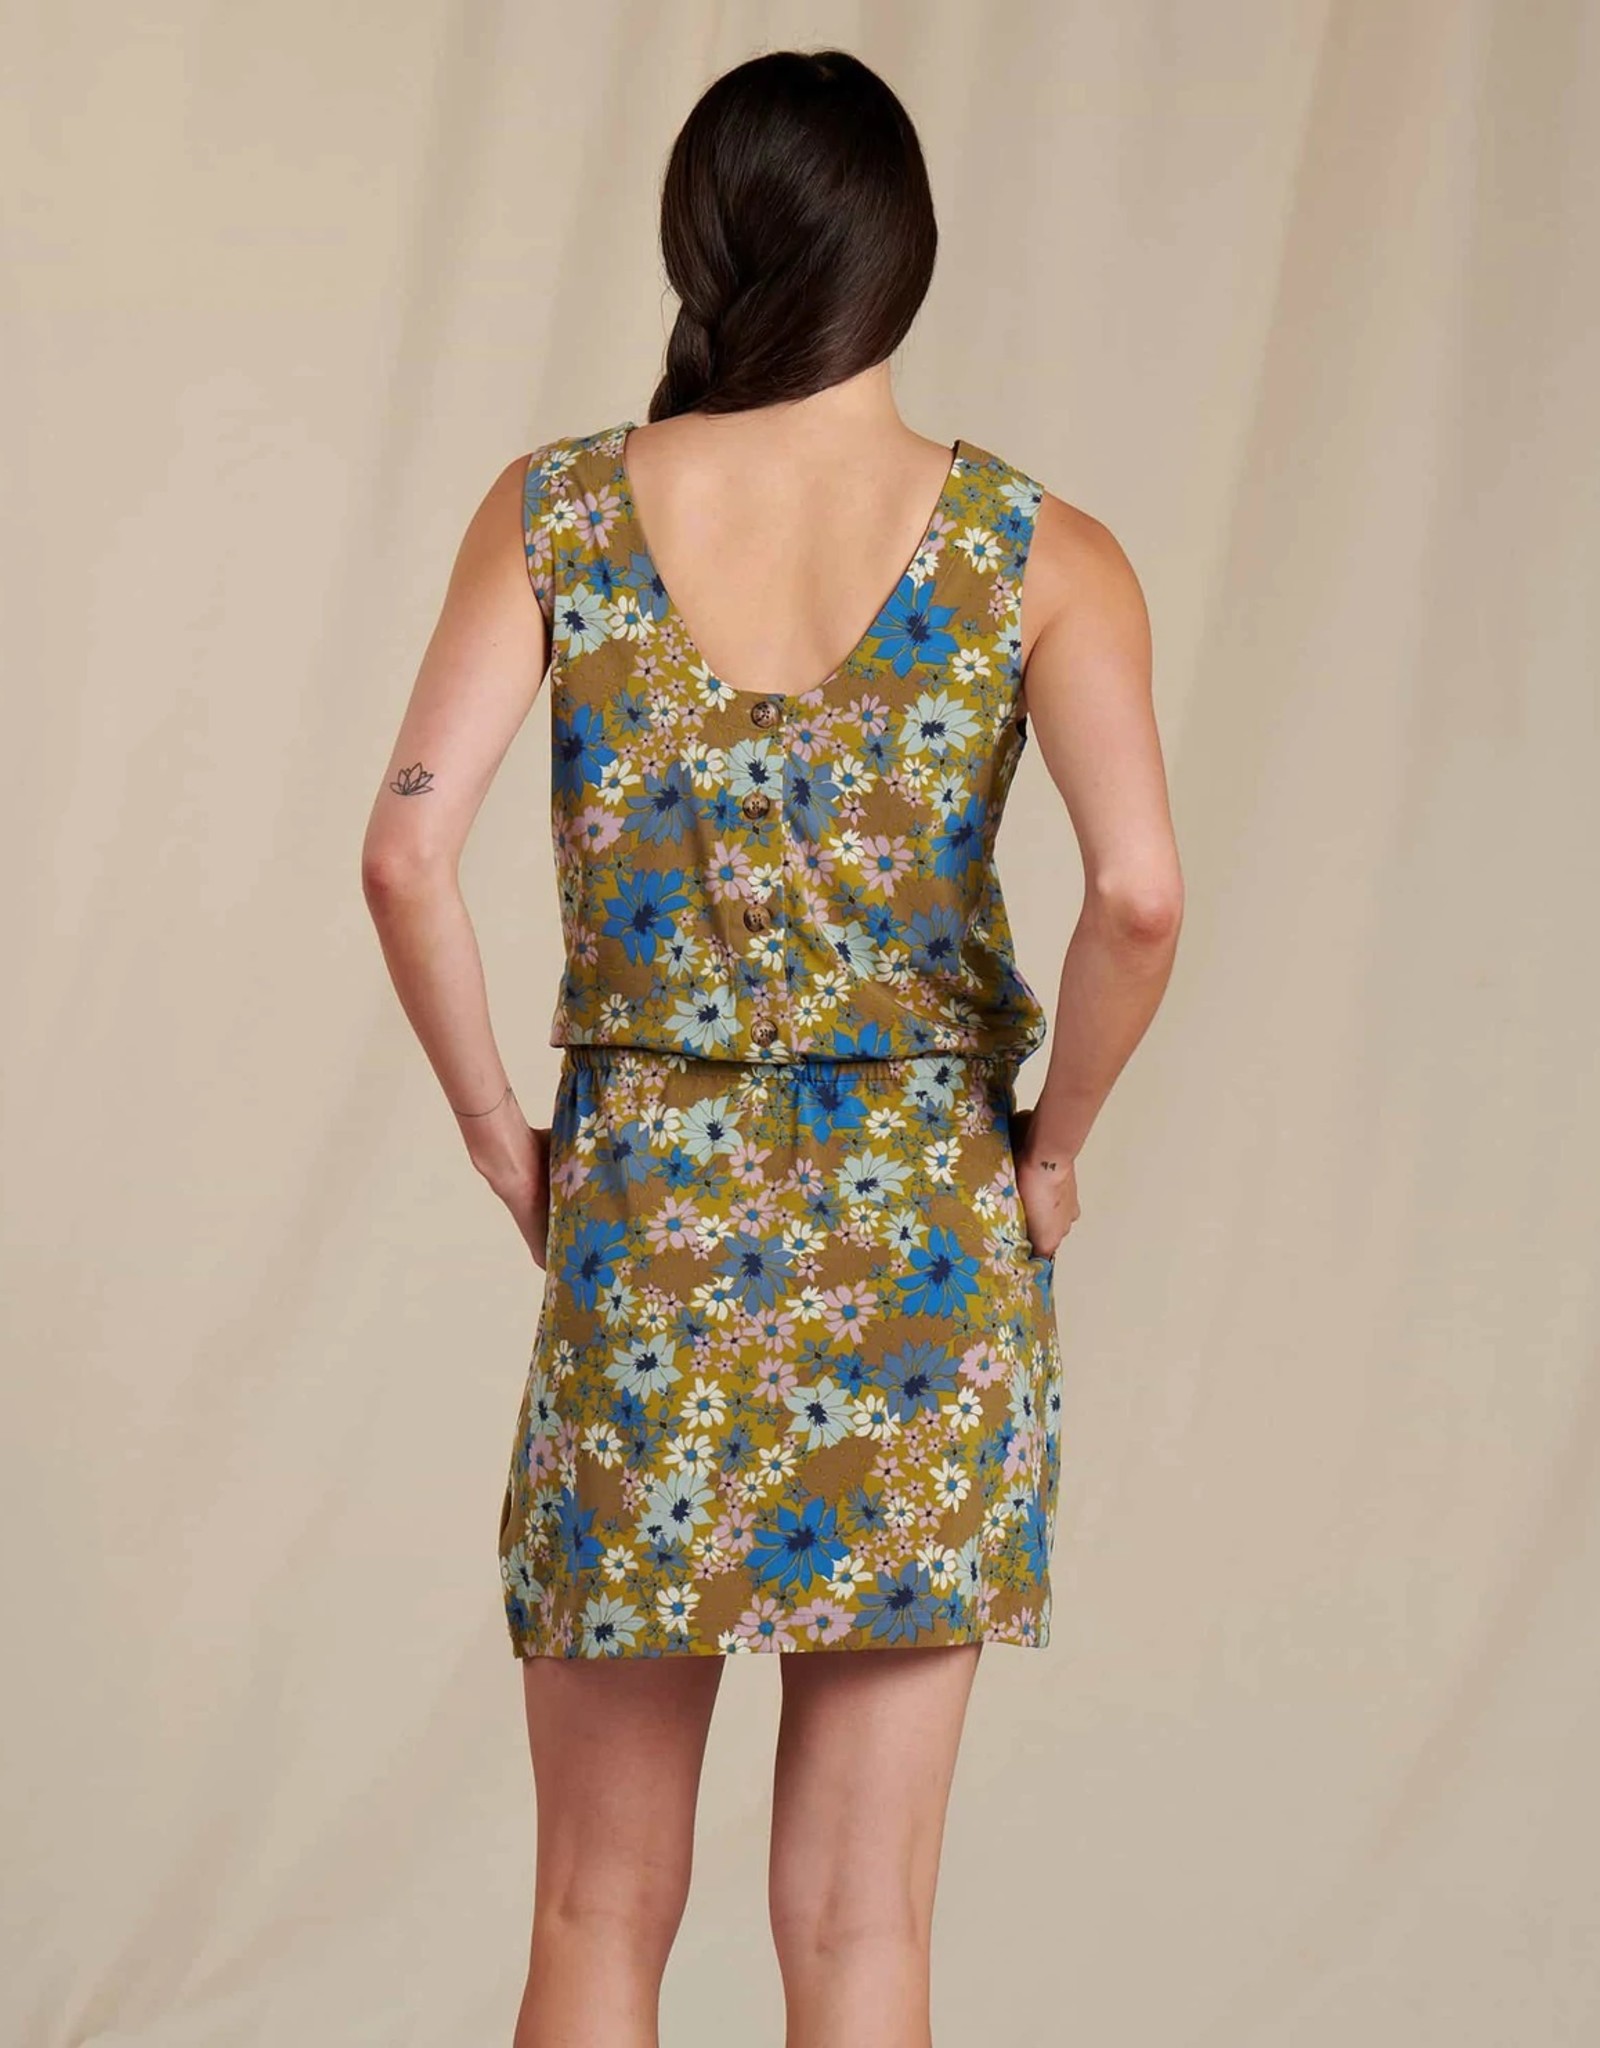 Toad&Co Sunkissed Liv Dress